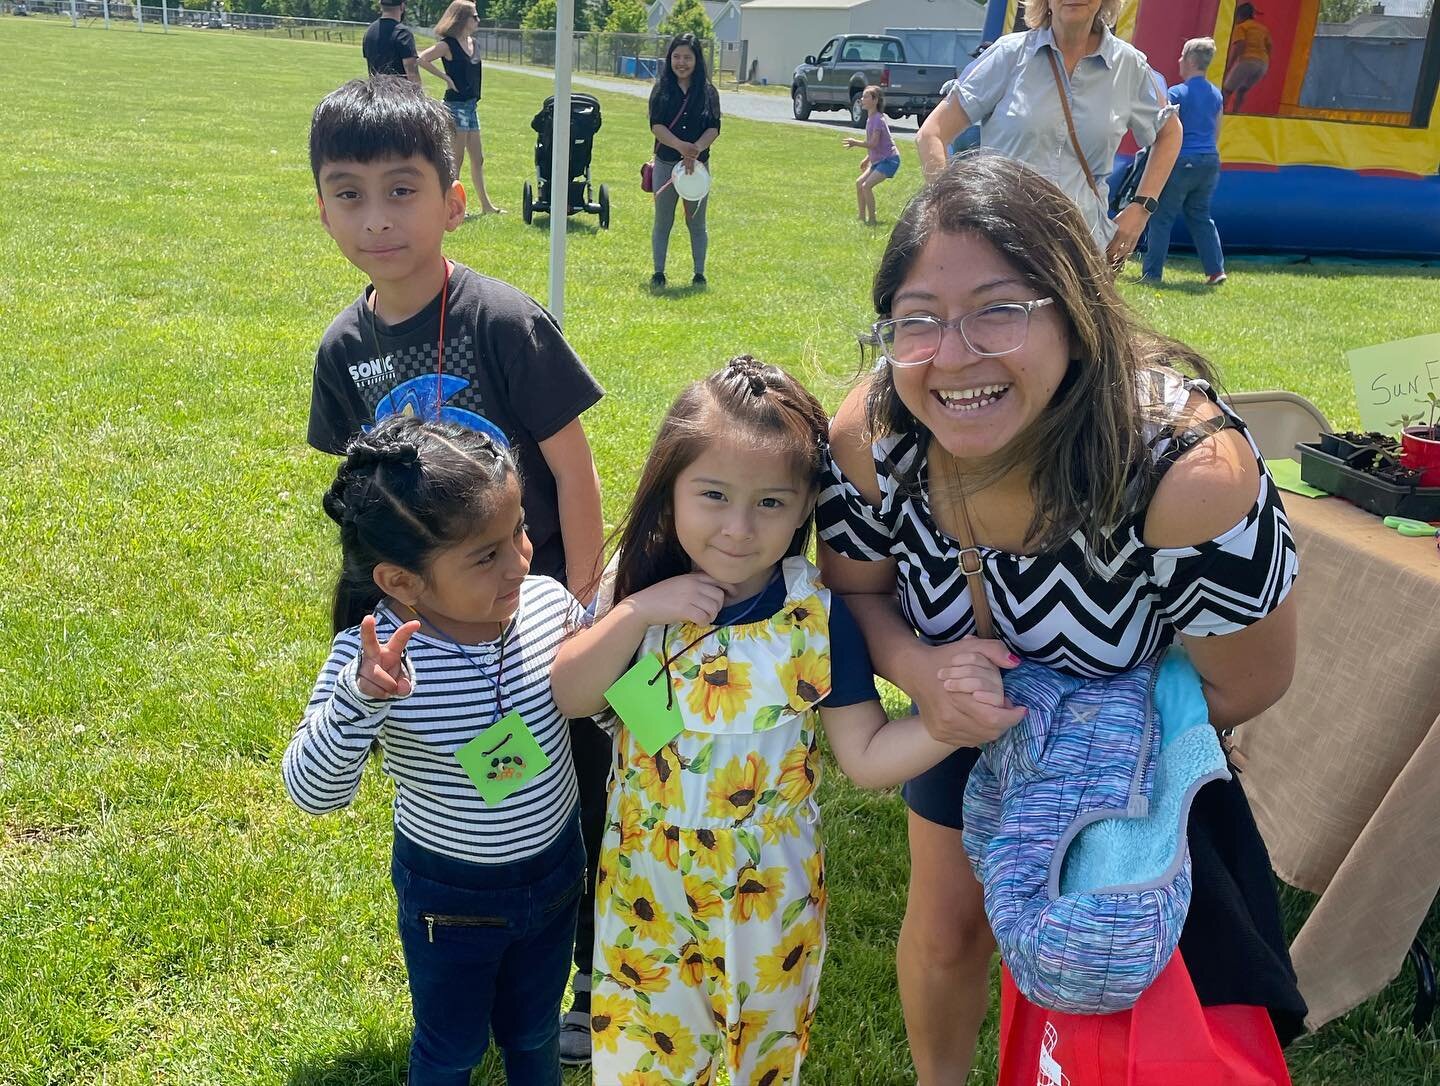 We had so much fun today at Georgetown spring fest selling the first of our seedlings and making seed necklaces with students and community members🌱🌱 thanks to our volunteers and Georgetown families for such a great day.